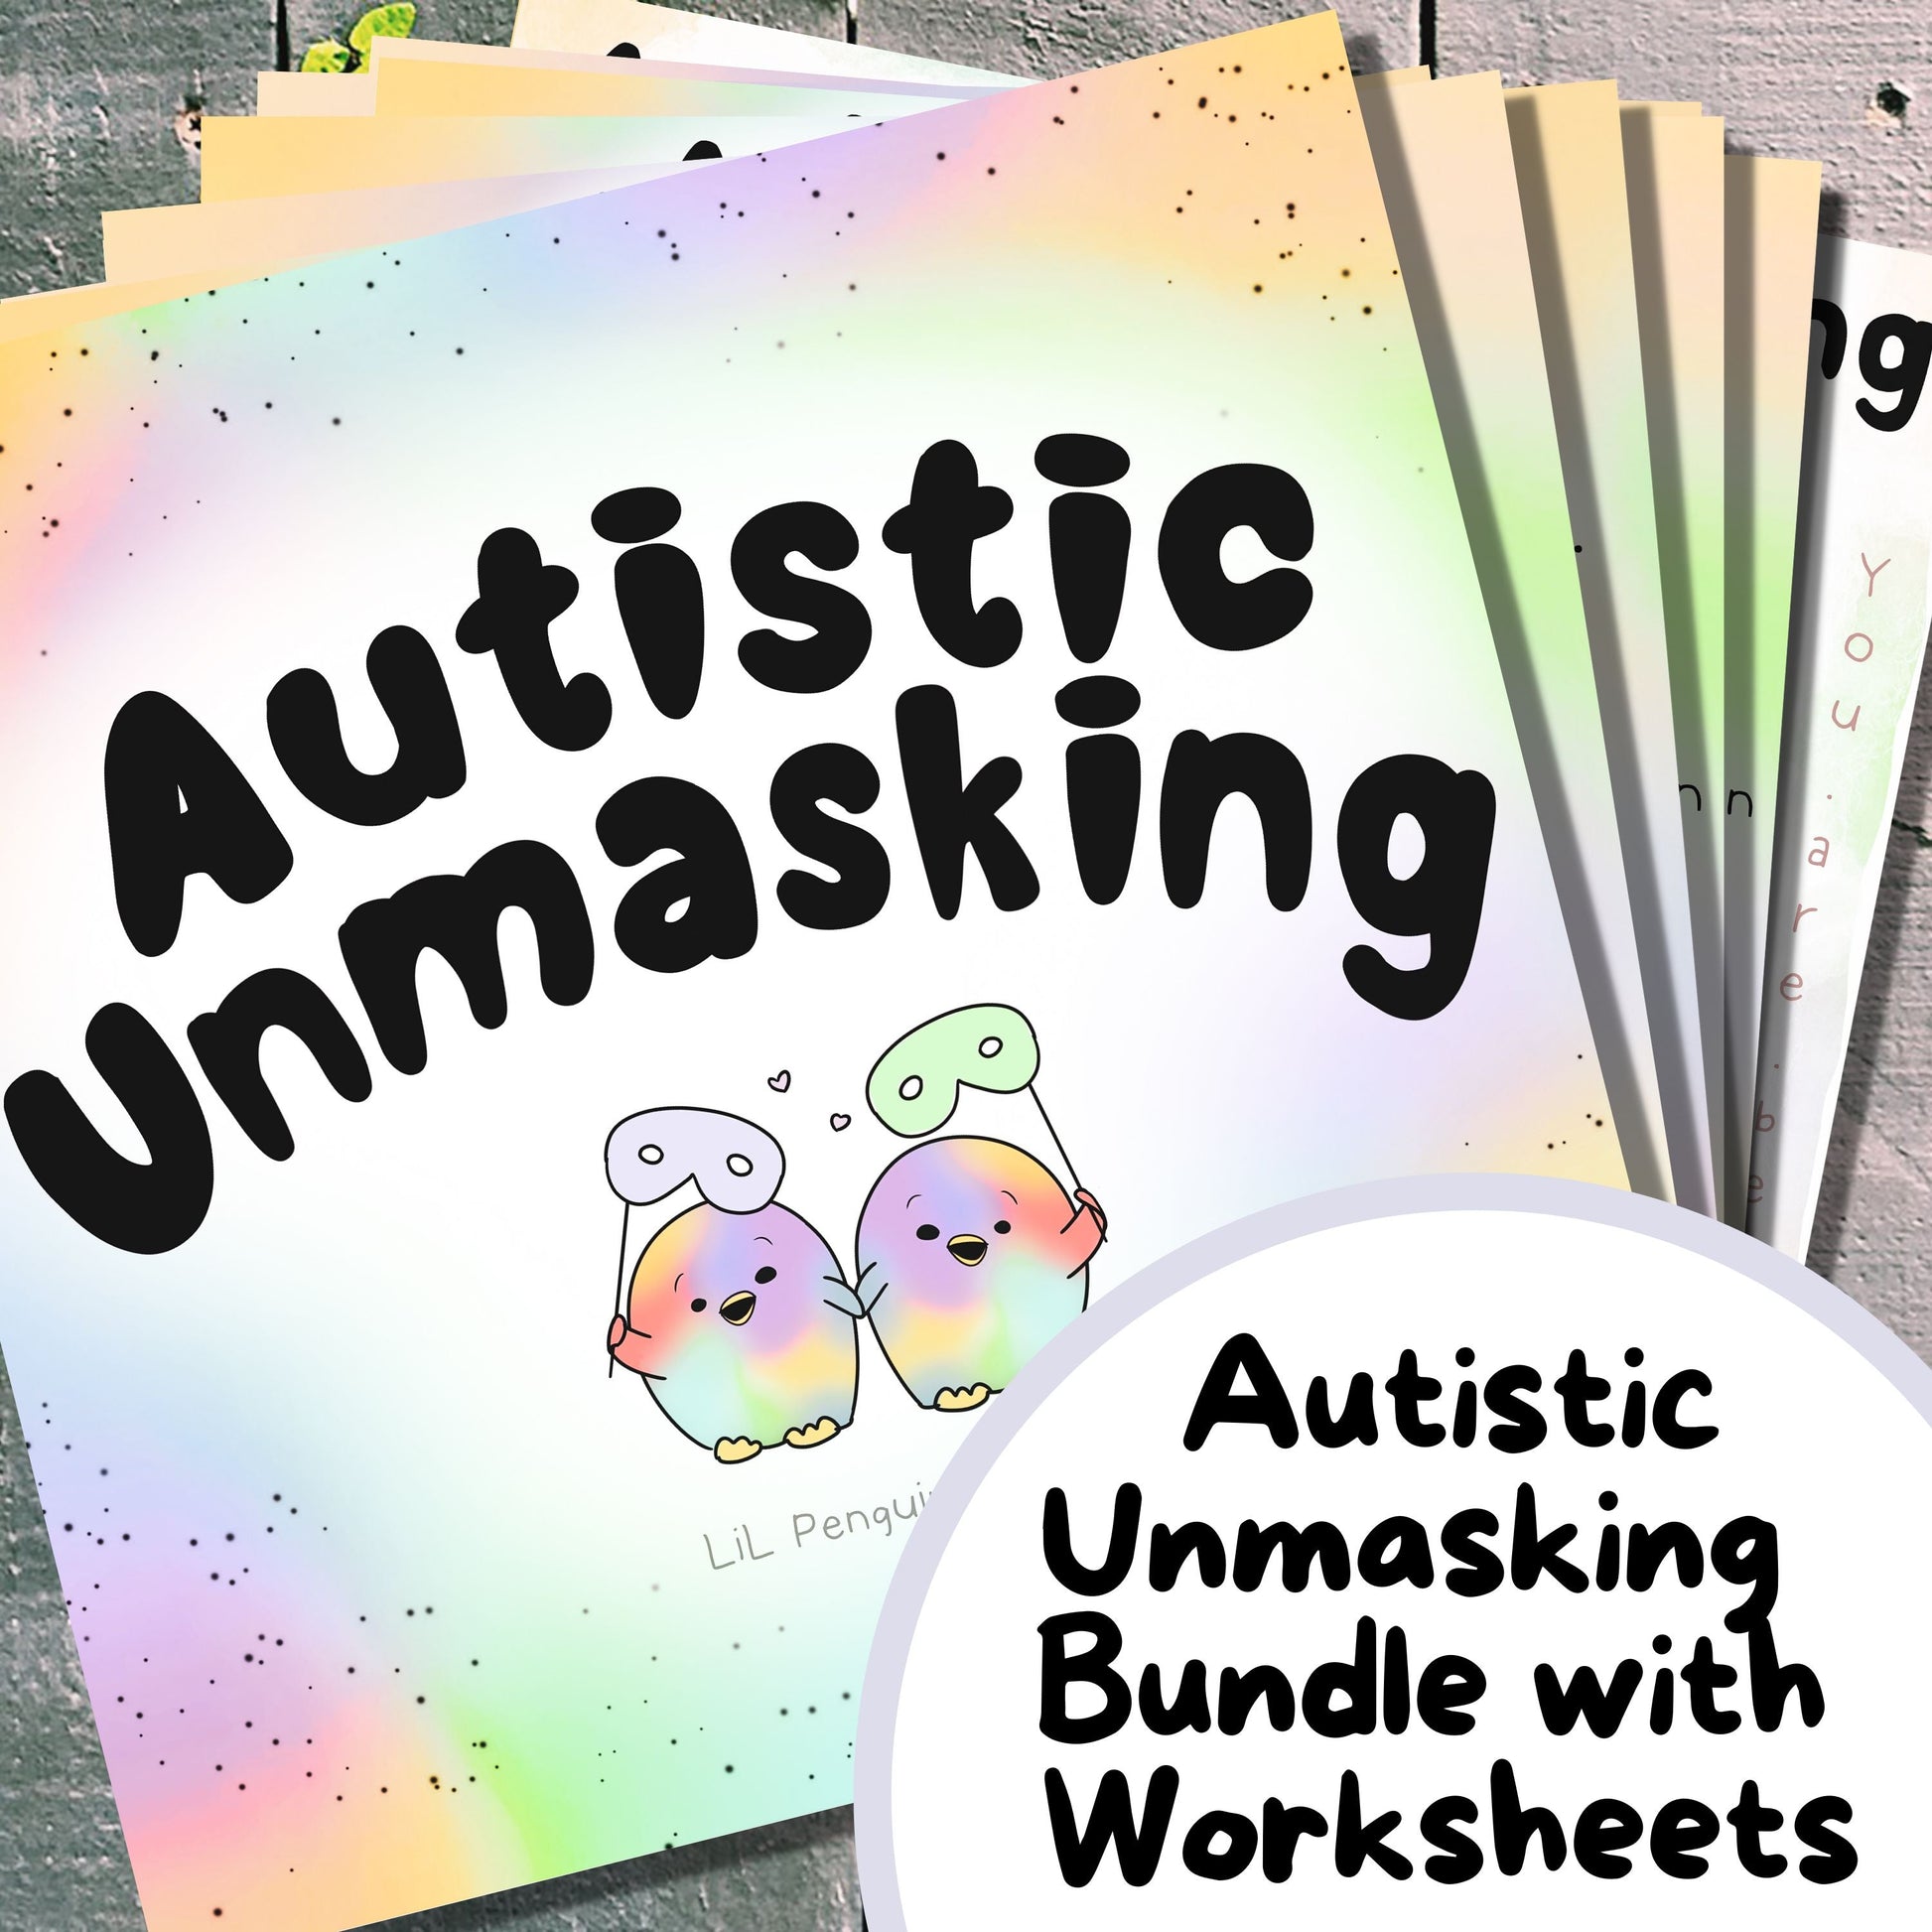 Autistic Unmasking Bundle with private practice licence. This bundle includes 6 Worksheets, a poster and 6 further art prints.